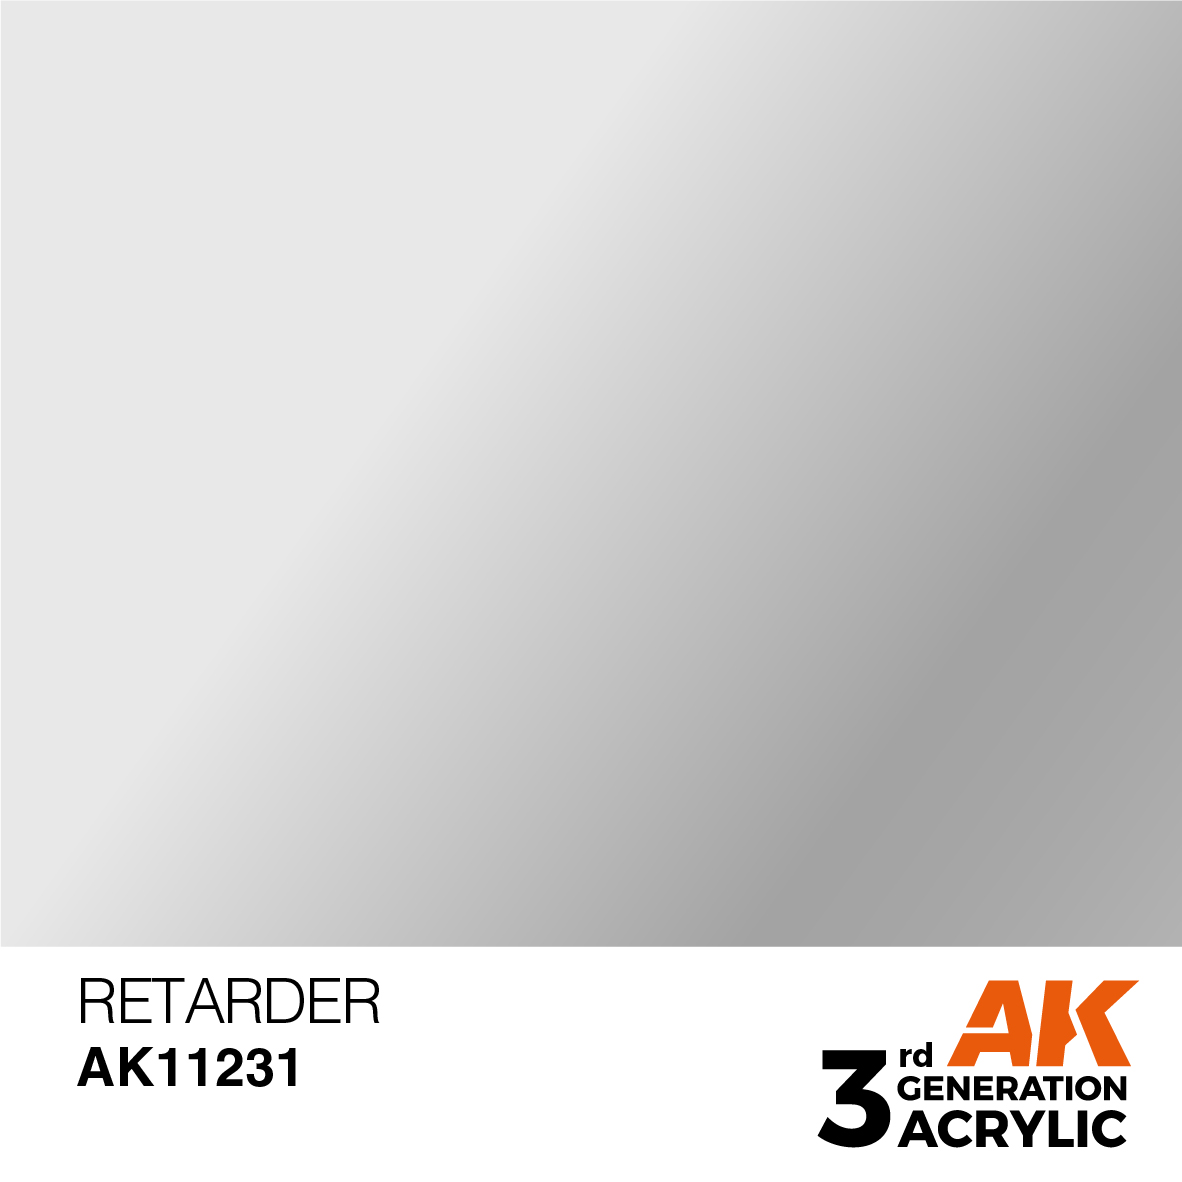 Buy RETARDER – AUXILIARY online for2,75€